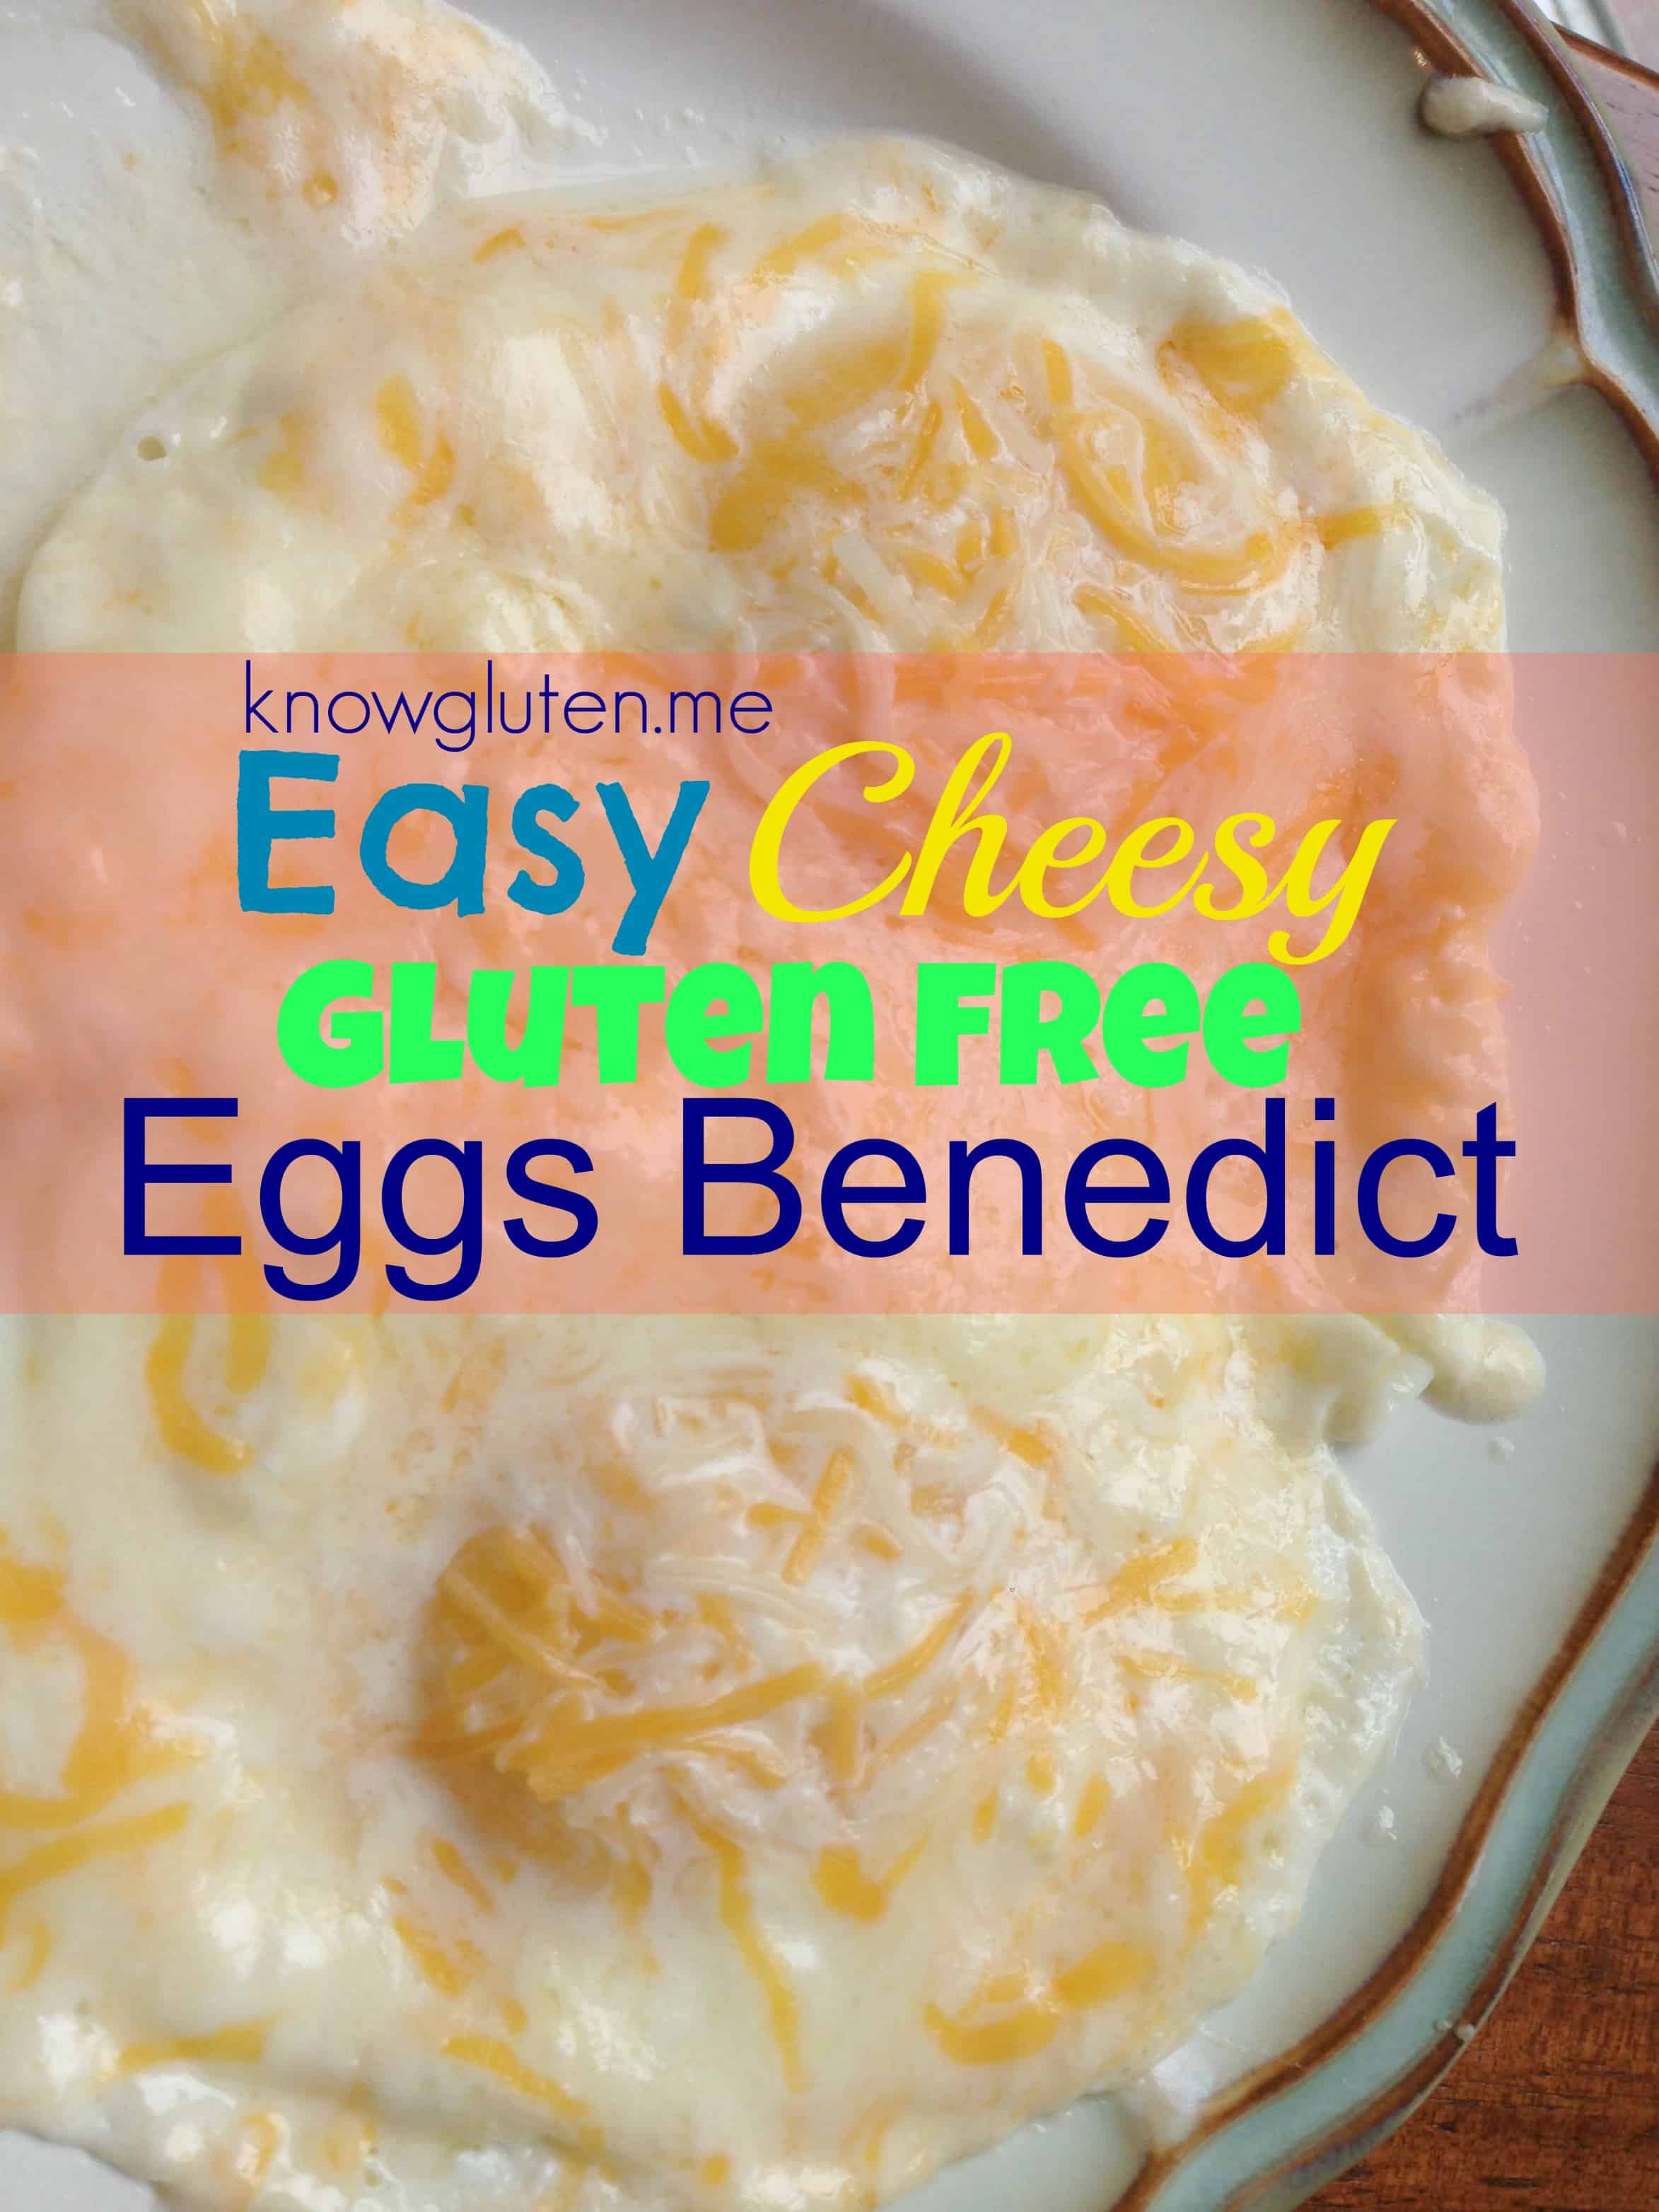 Easy Cheesy Gluten Free Eggs Benedict from knowgluten.me - a fast, easy alternative when you're craving Eggs Benedict